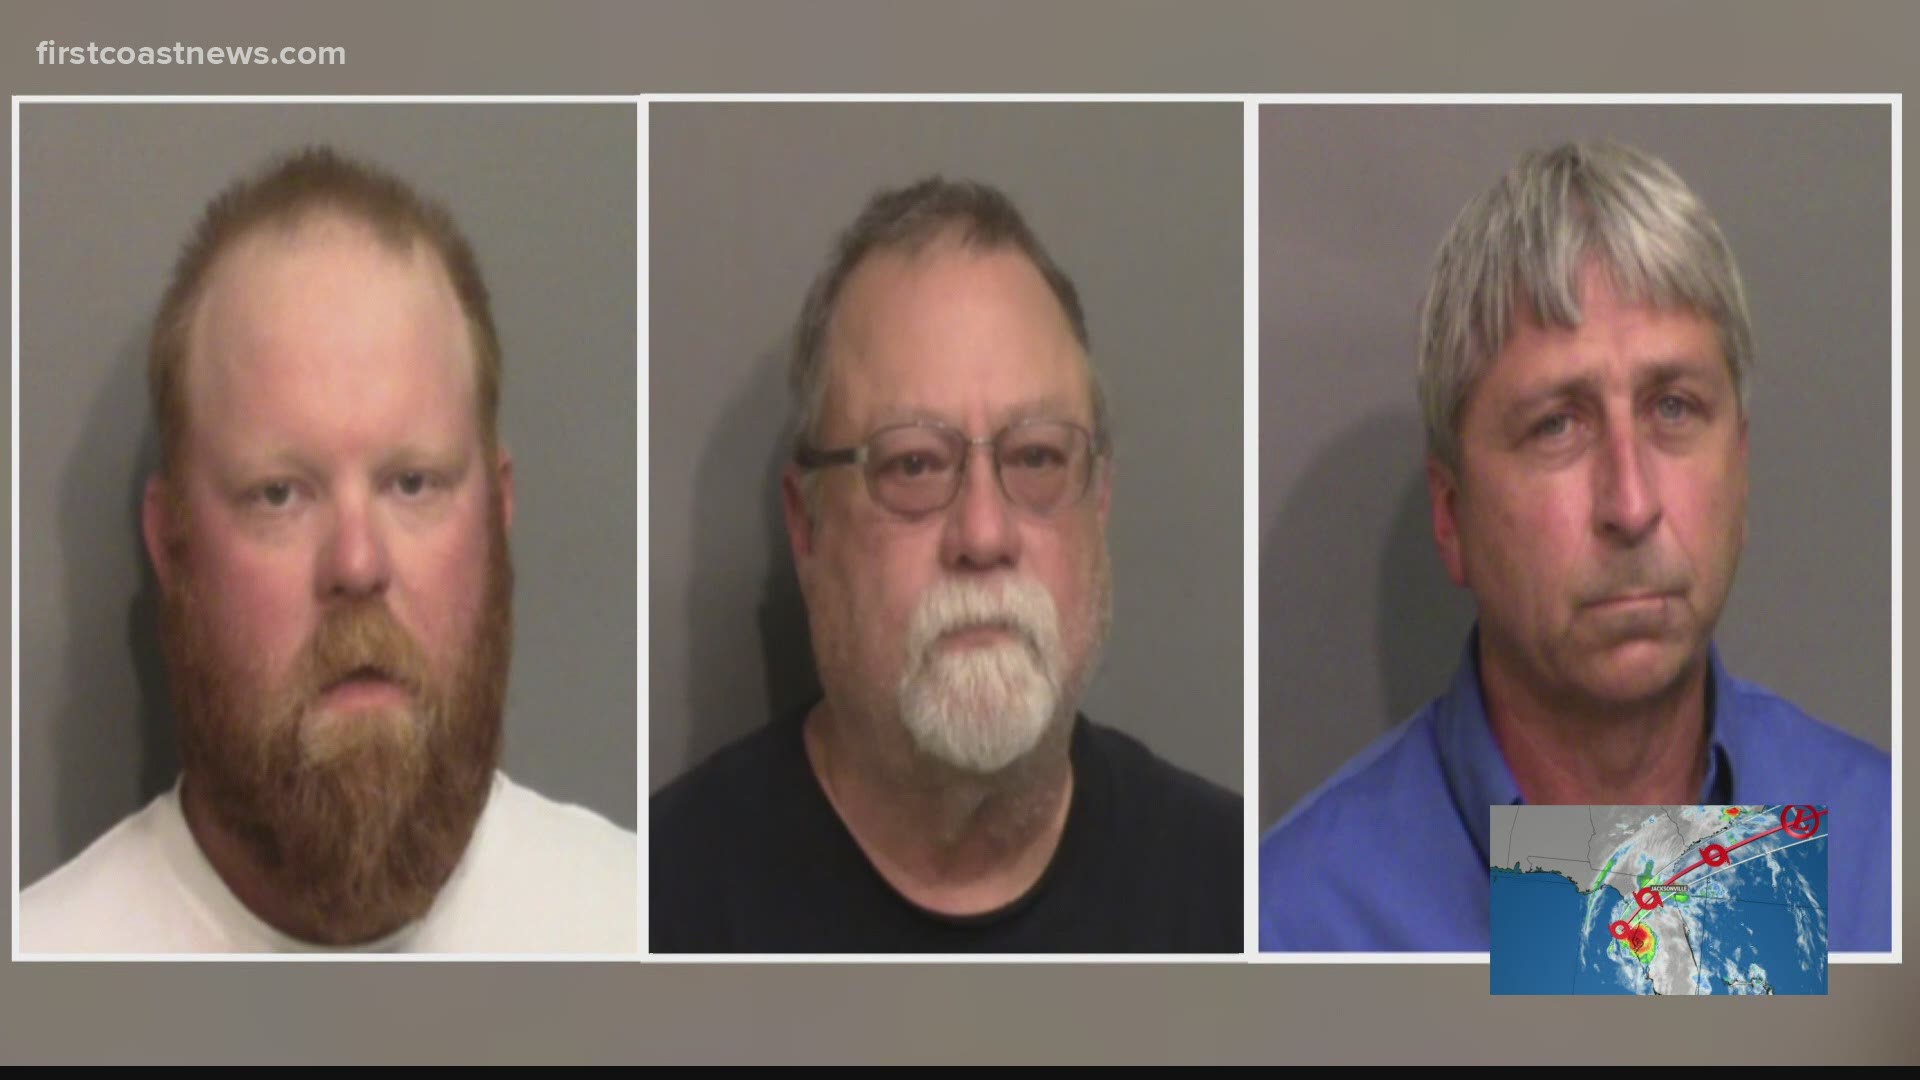 The three men charged with the death of a Brunswick man are back in court Thursday.